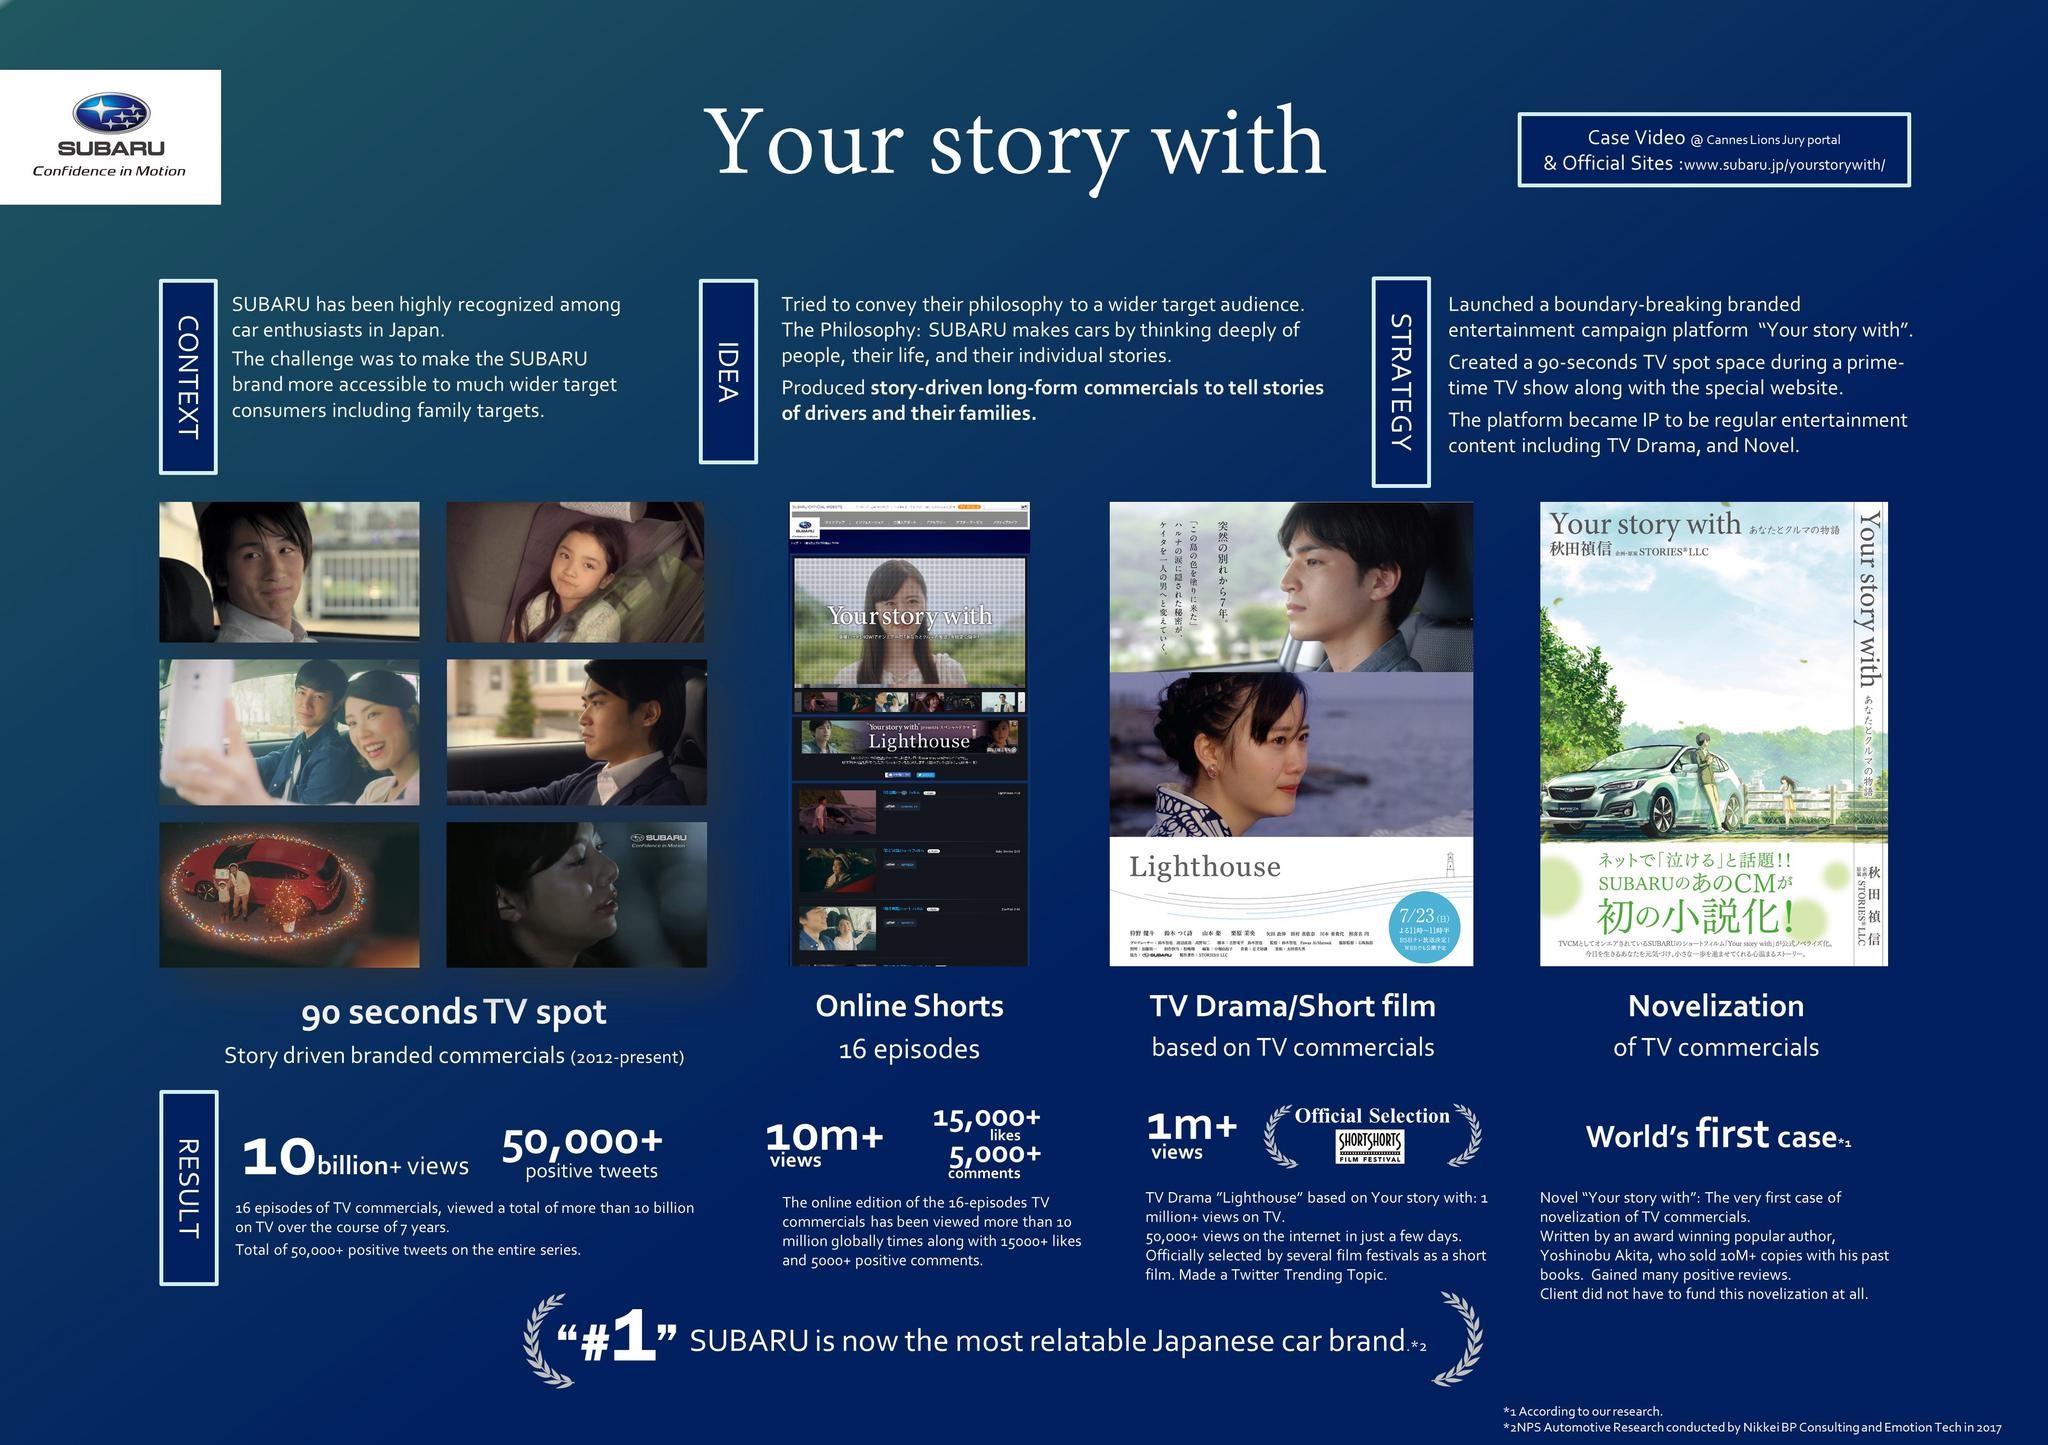 SUBARU "Your story with" Wholistic Media/Branded Ent. CP with TVC/TVDrama/Novel/Short